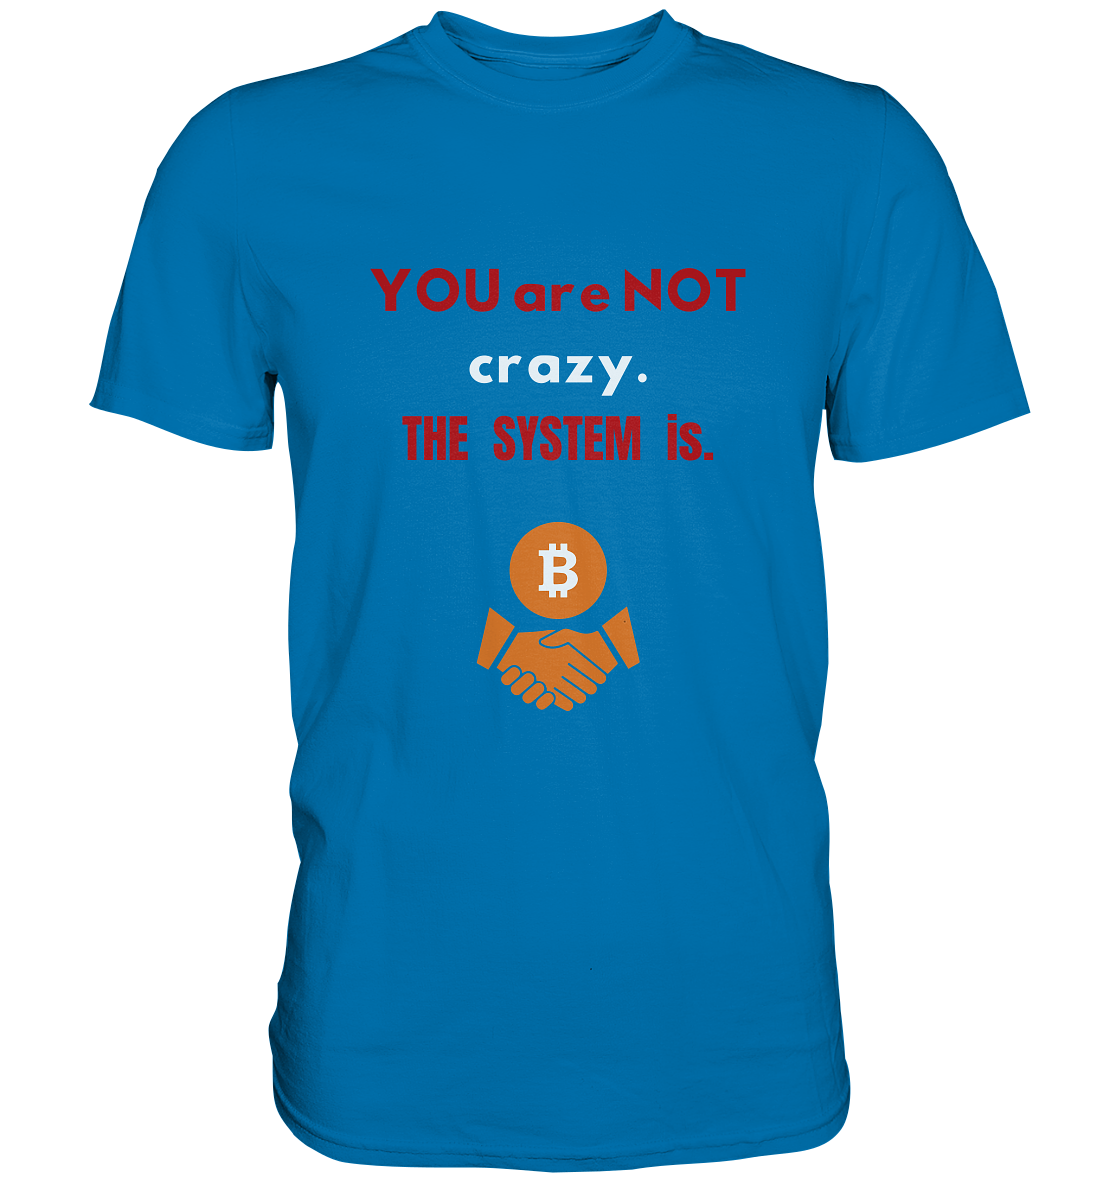 YOU are NOT crazy. THE SYSTEM is. - Premium Shirt